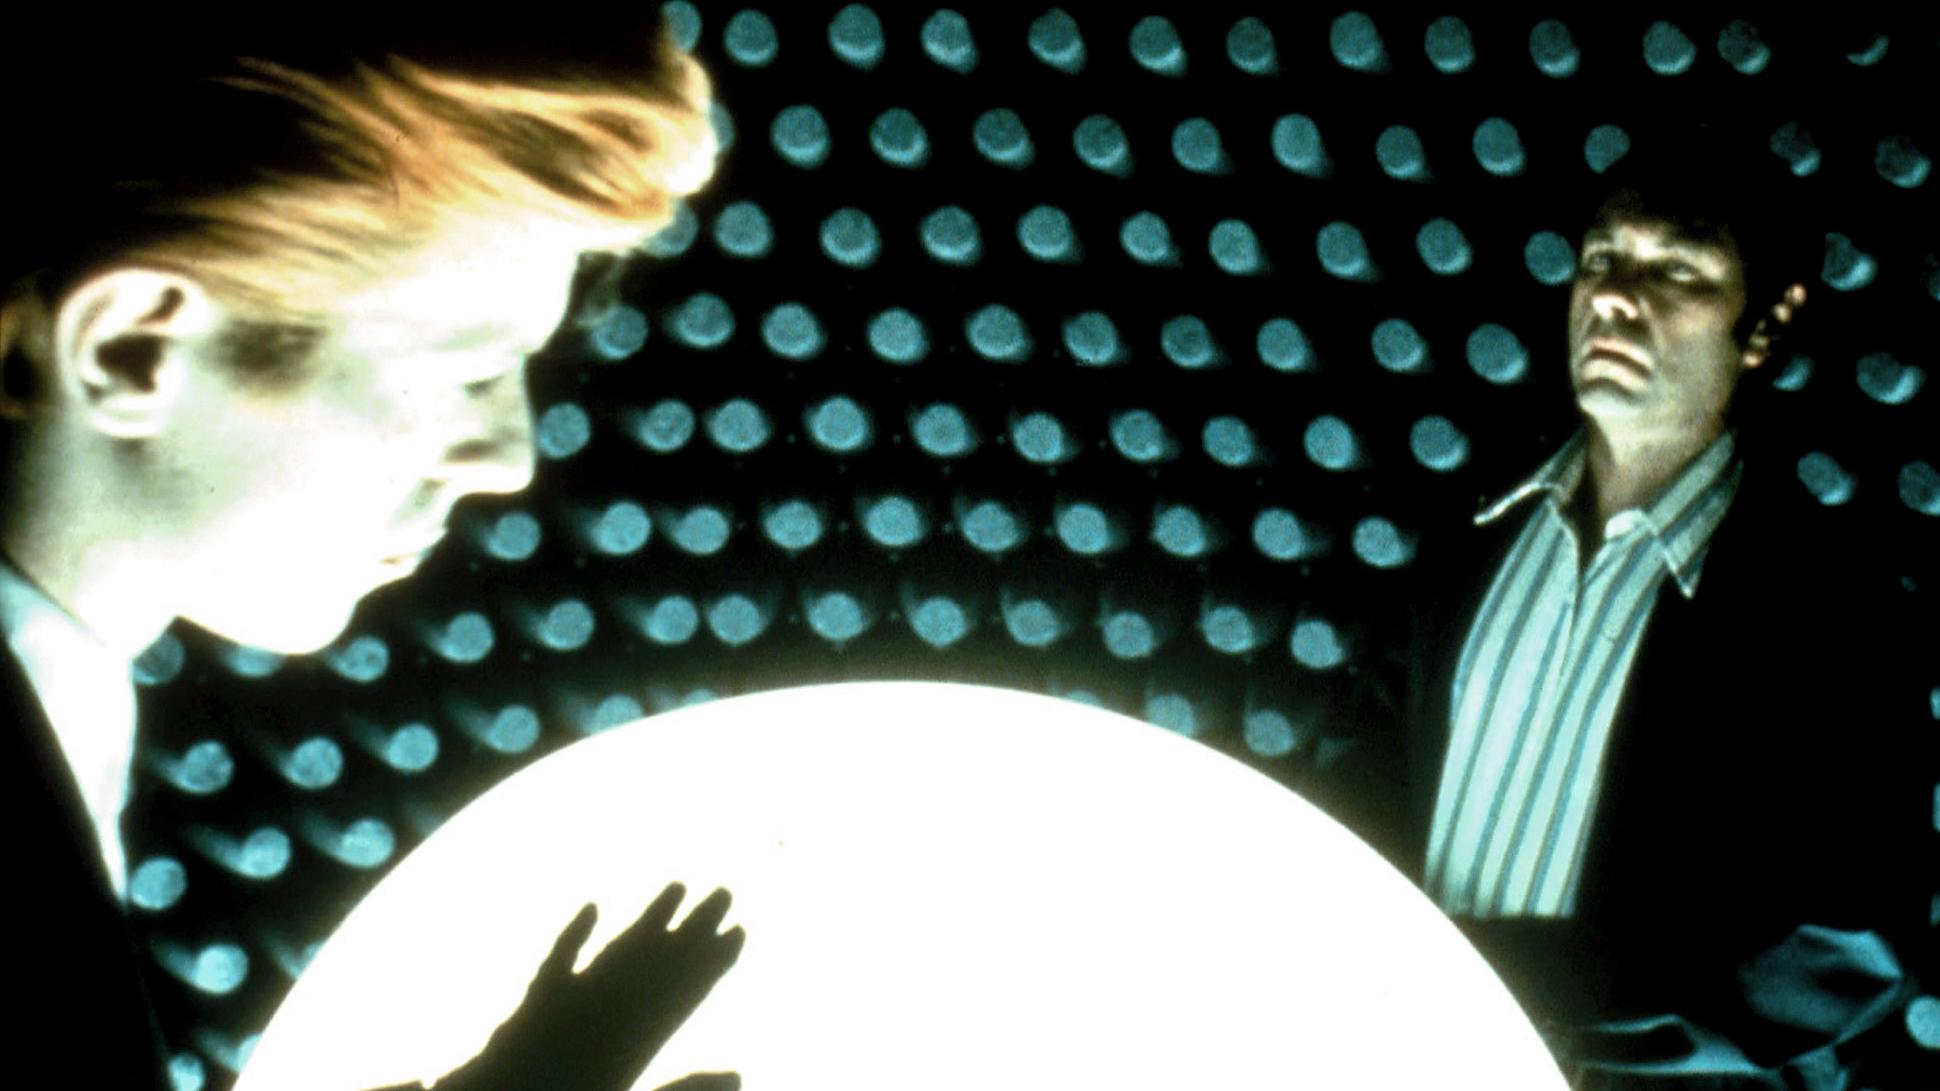 Scene from "The Man Who Fell To Earth" We face a challenge to our freedom.